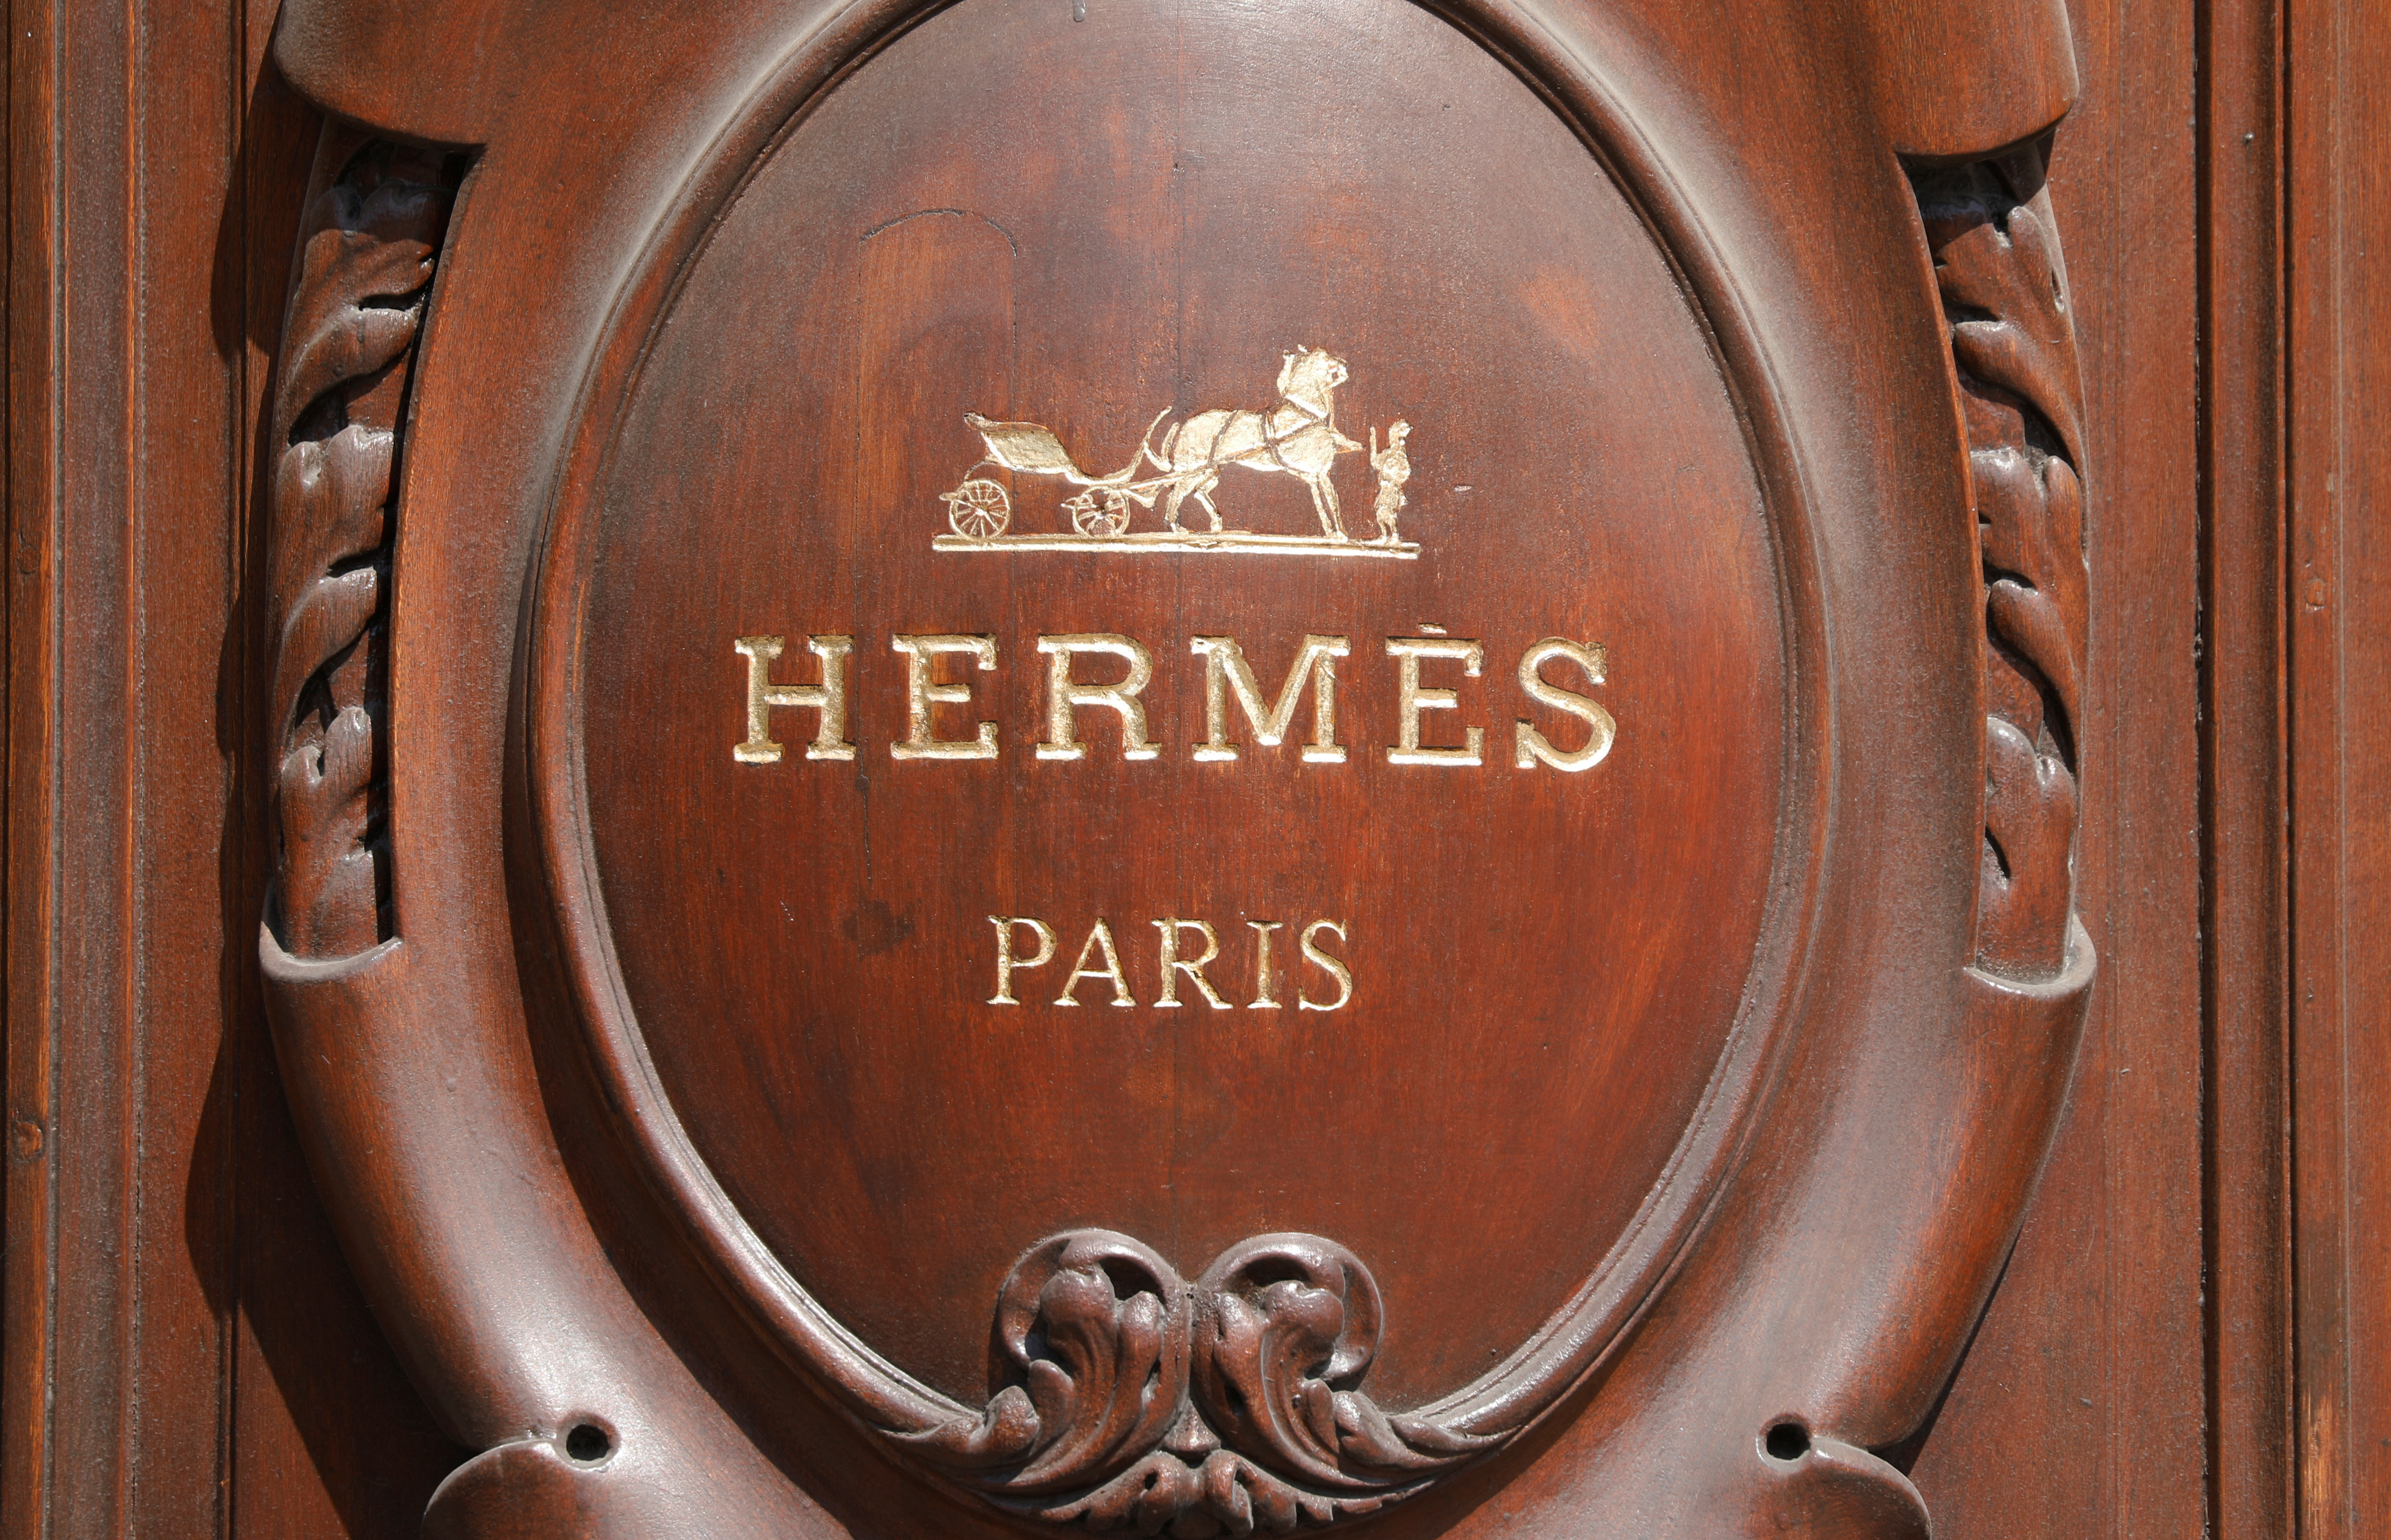 Hermes Sales (EPA:RMS) Jump on Soaring Demand for Luxury Watches